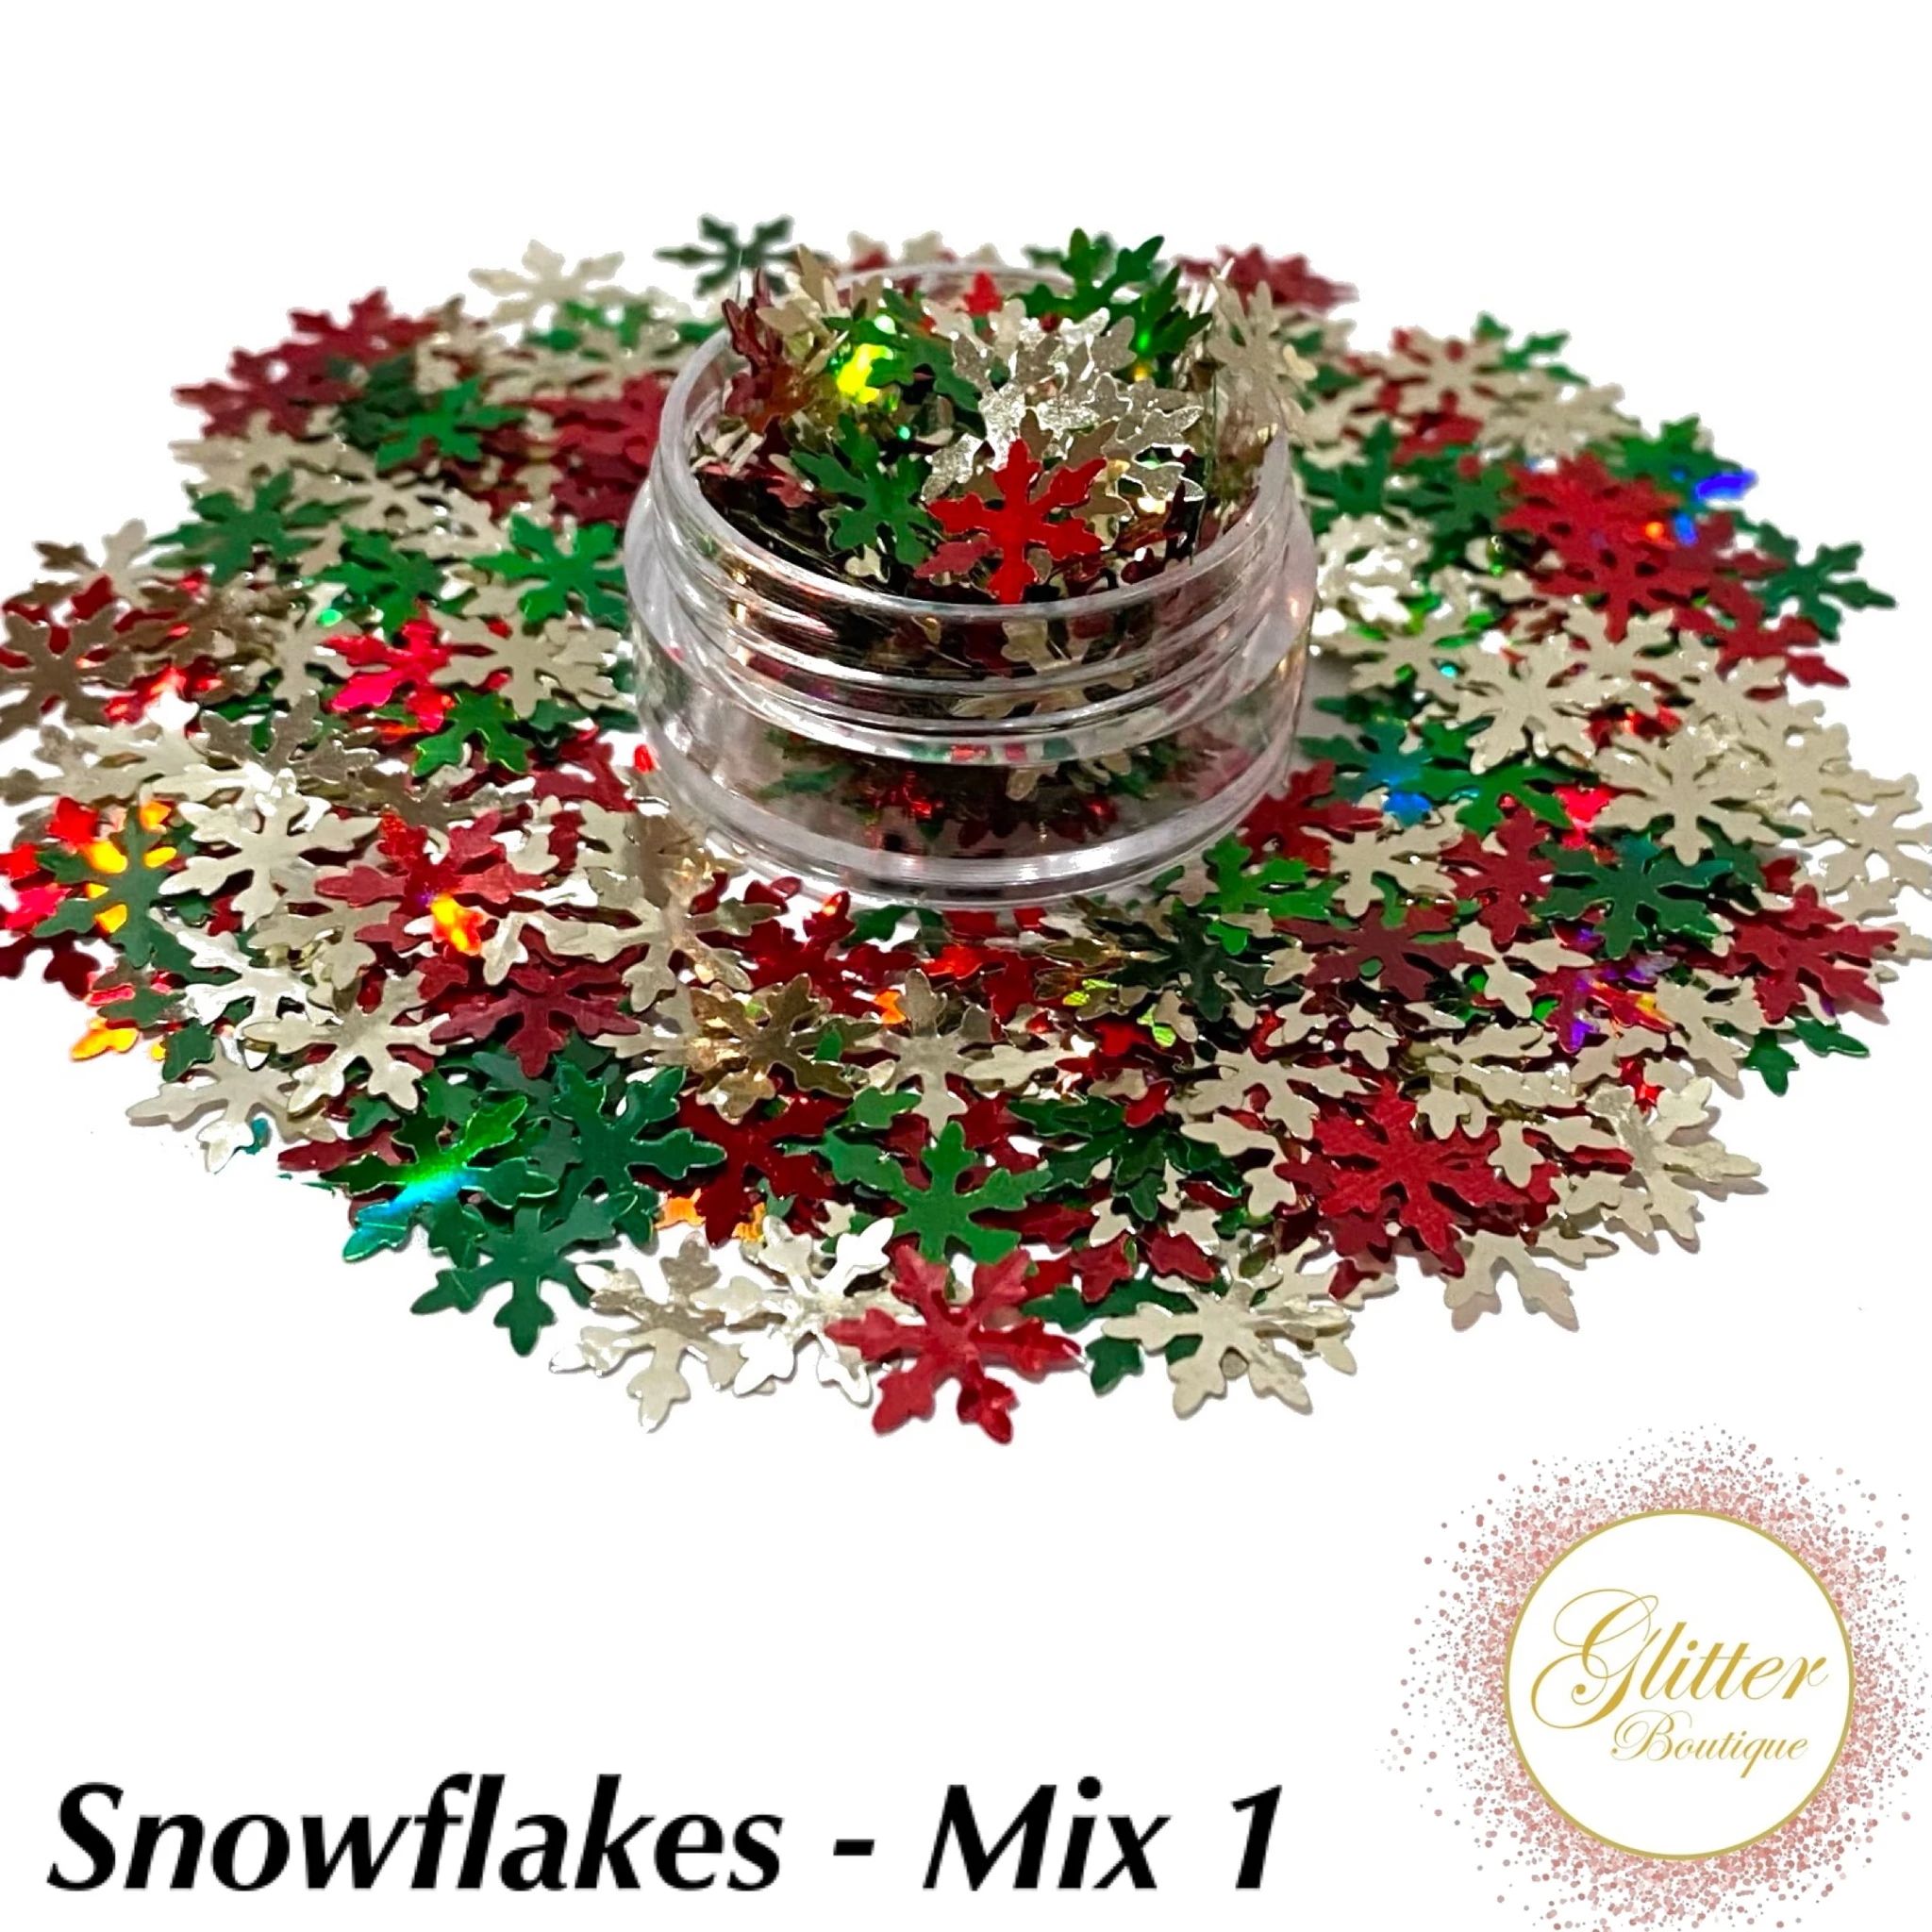 Glitter Boutique - Snowflakes Mix 1 - Creata Beauty - Professional Beauty Products